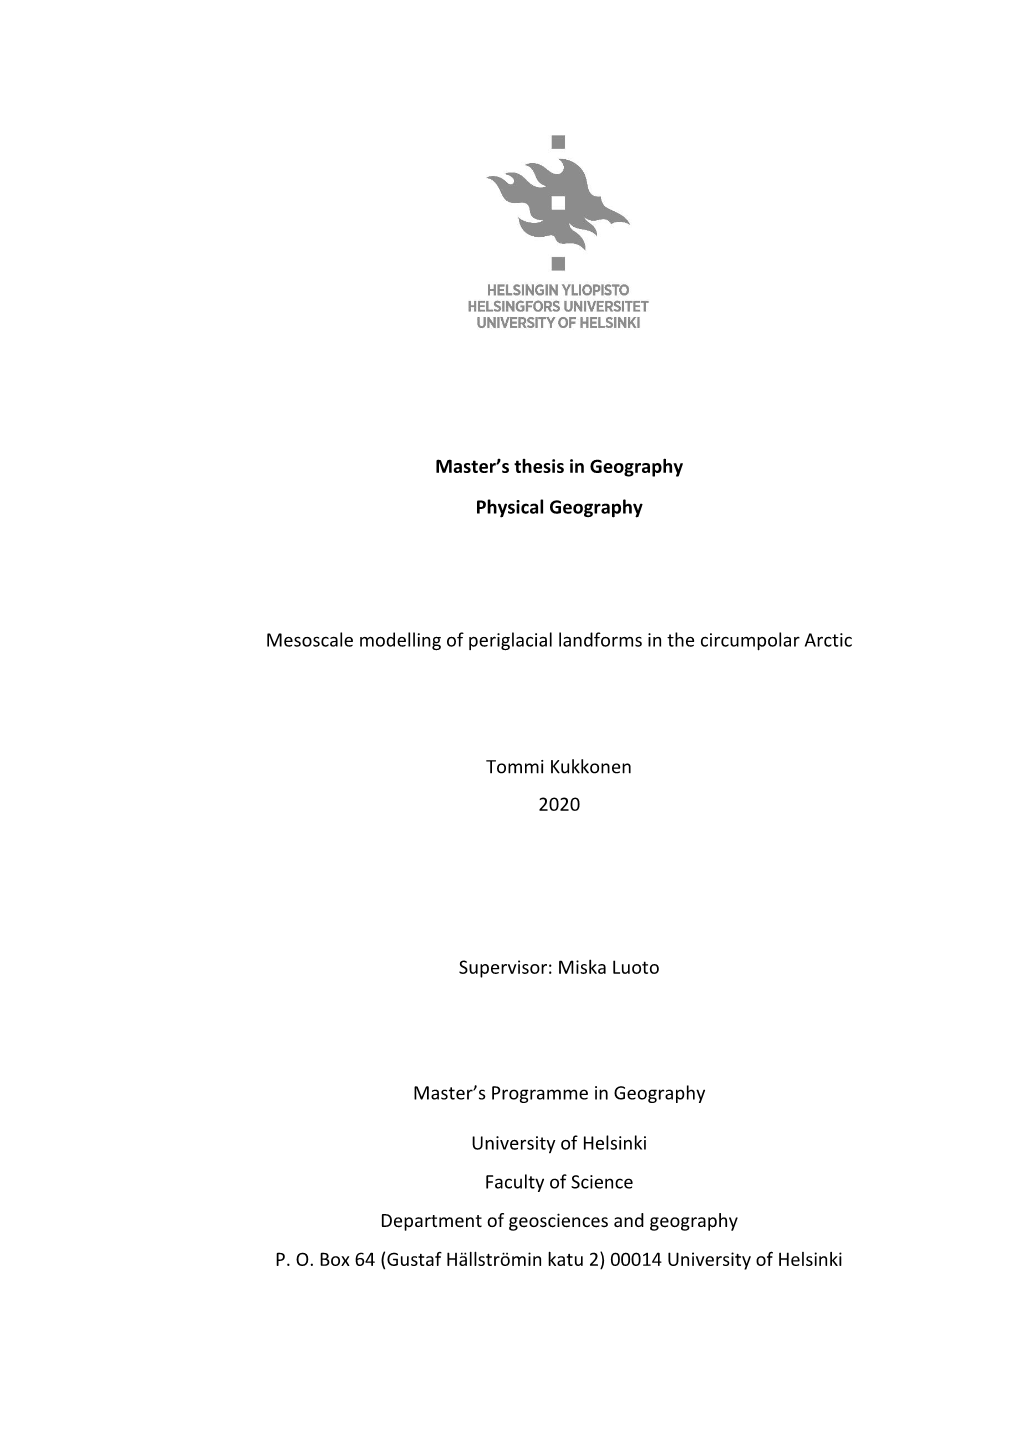 Master's Thesis in Geography Physical Geography Mesoscale Modelling of Periglacial Landforms in the Circumpolar Arctic Tommi K